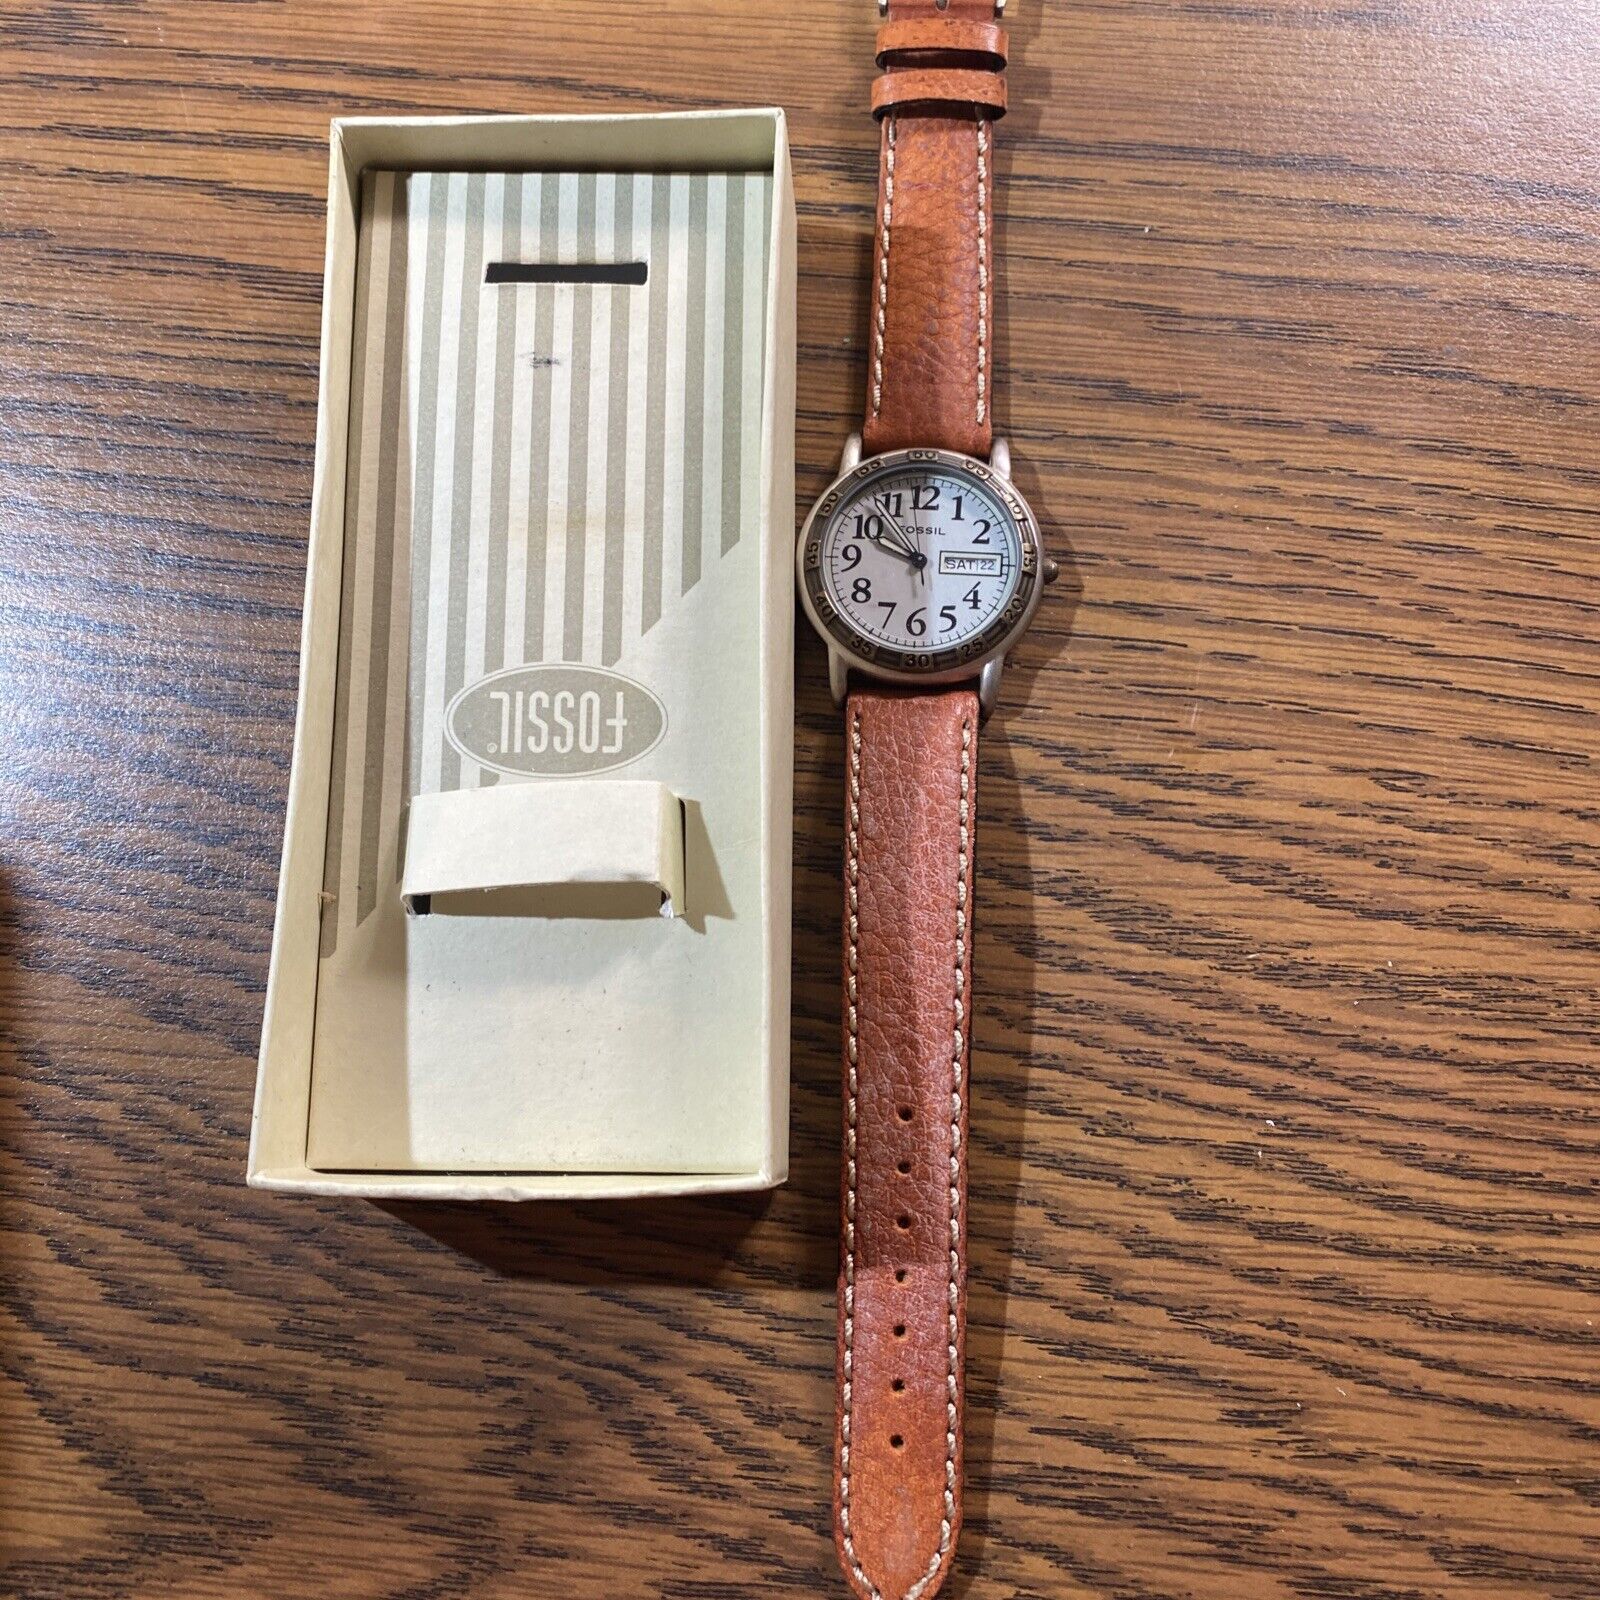 Vintage NOS Fossil Watch EC-8851 Day Date Leather Band - 3D